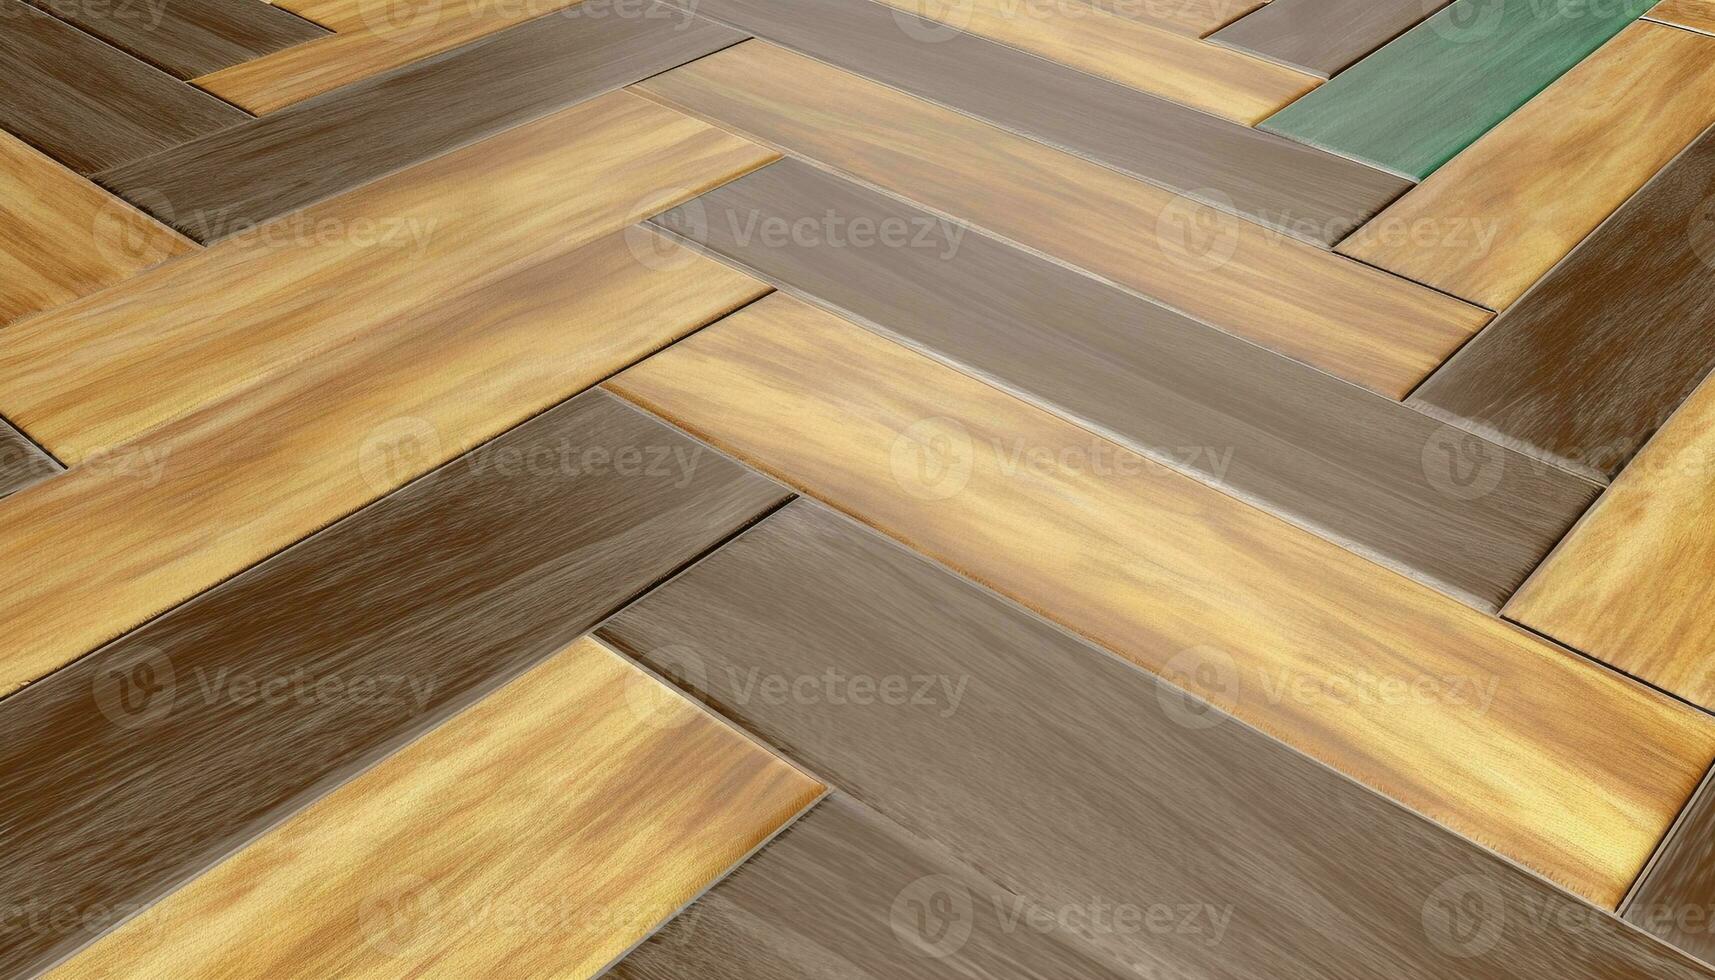 Geometric shapes of hardwood planks create modern parquet flooring design generated by AI photo